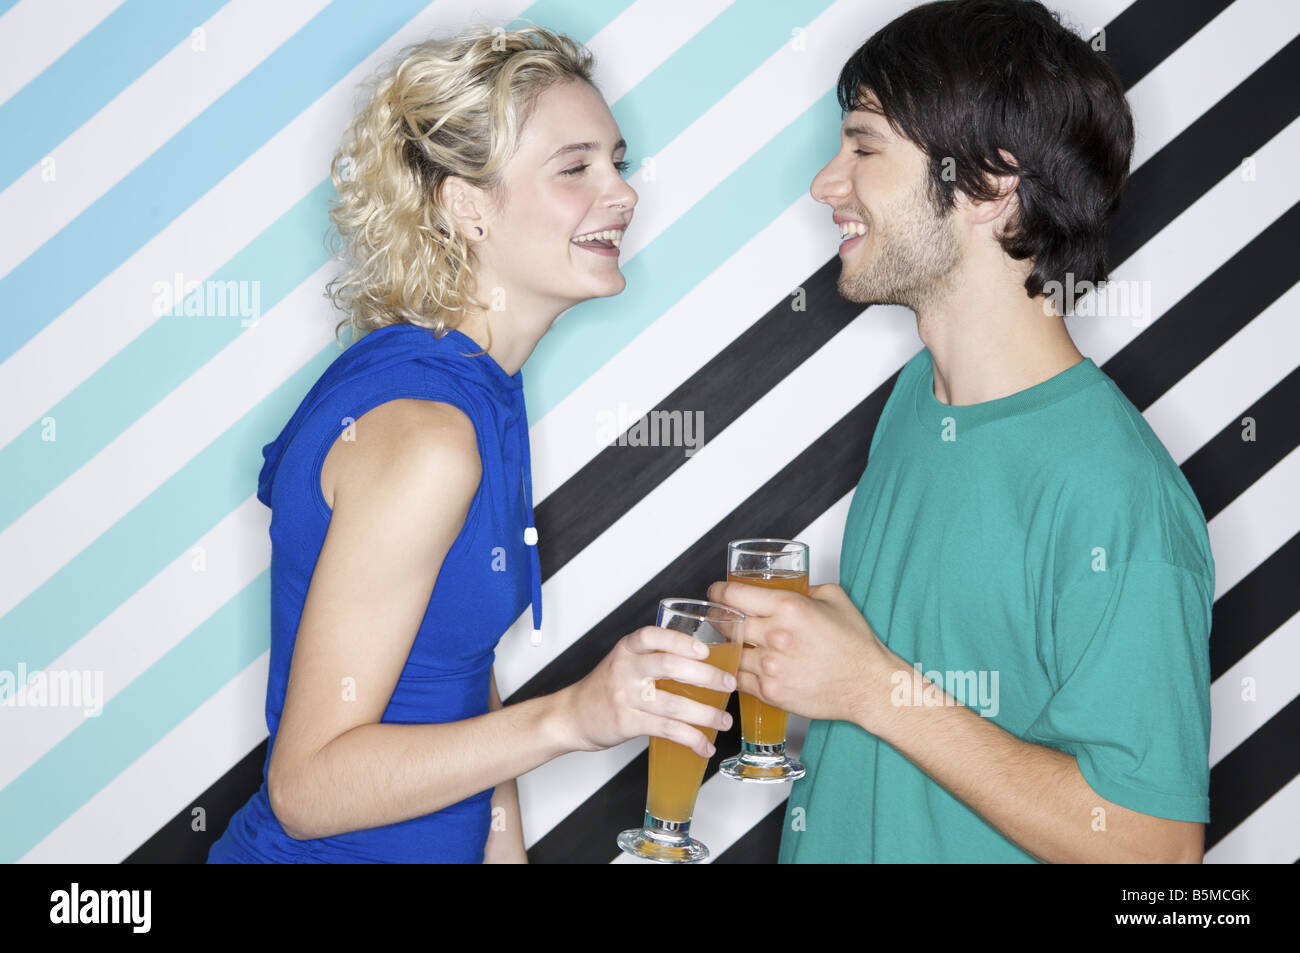 A teenage couple holding beverages Stock Photo